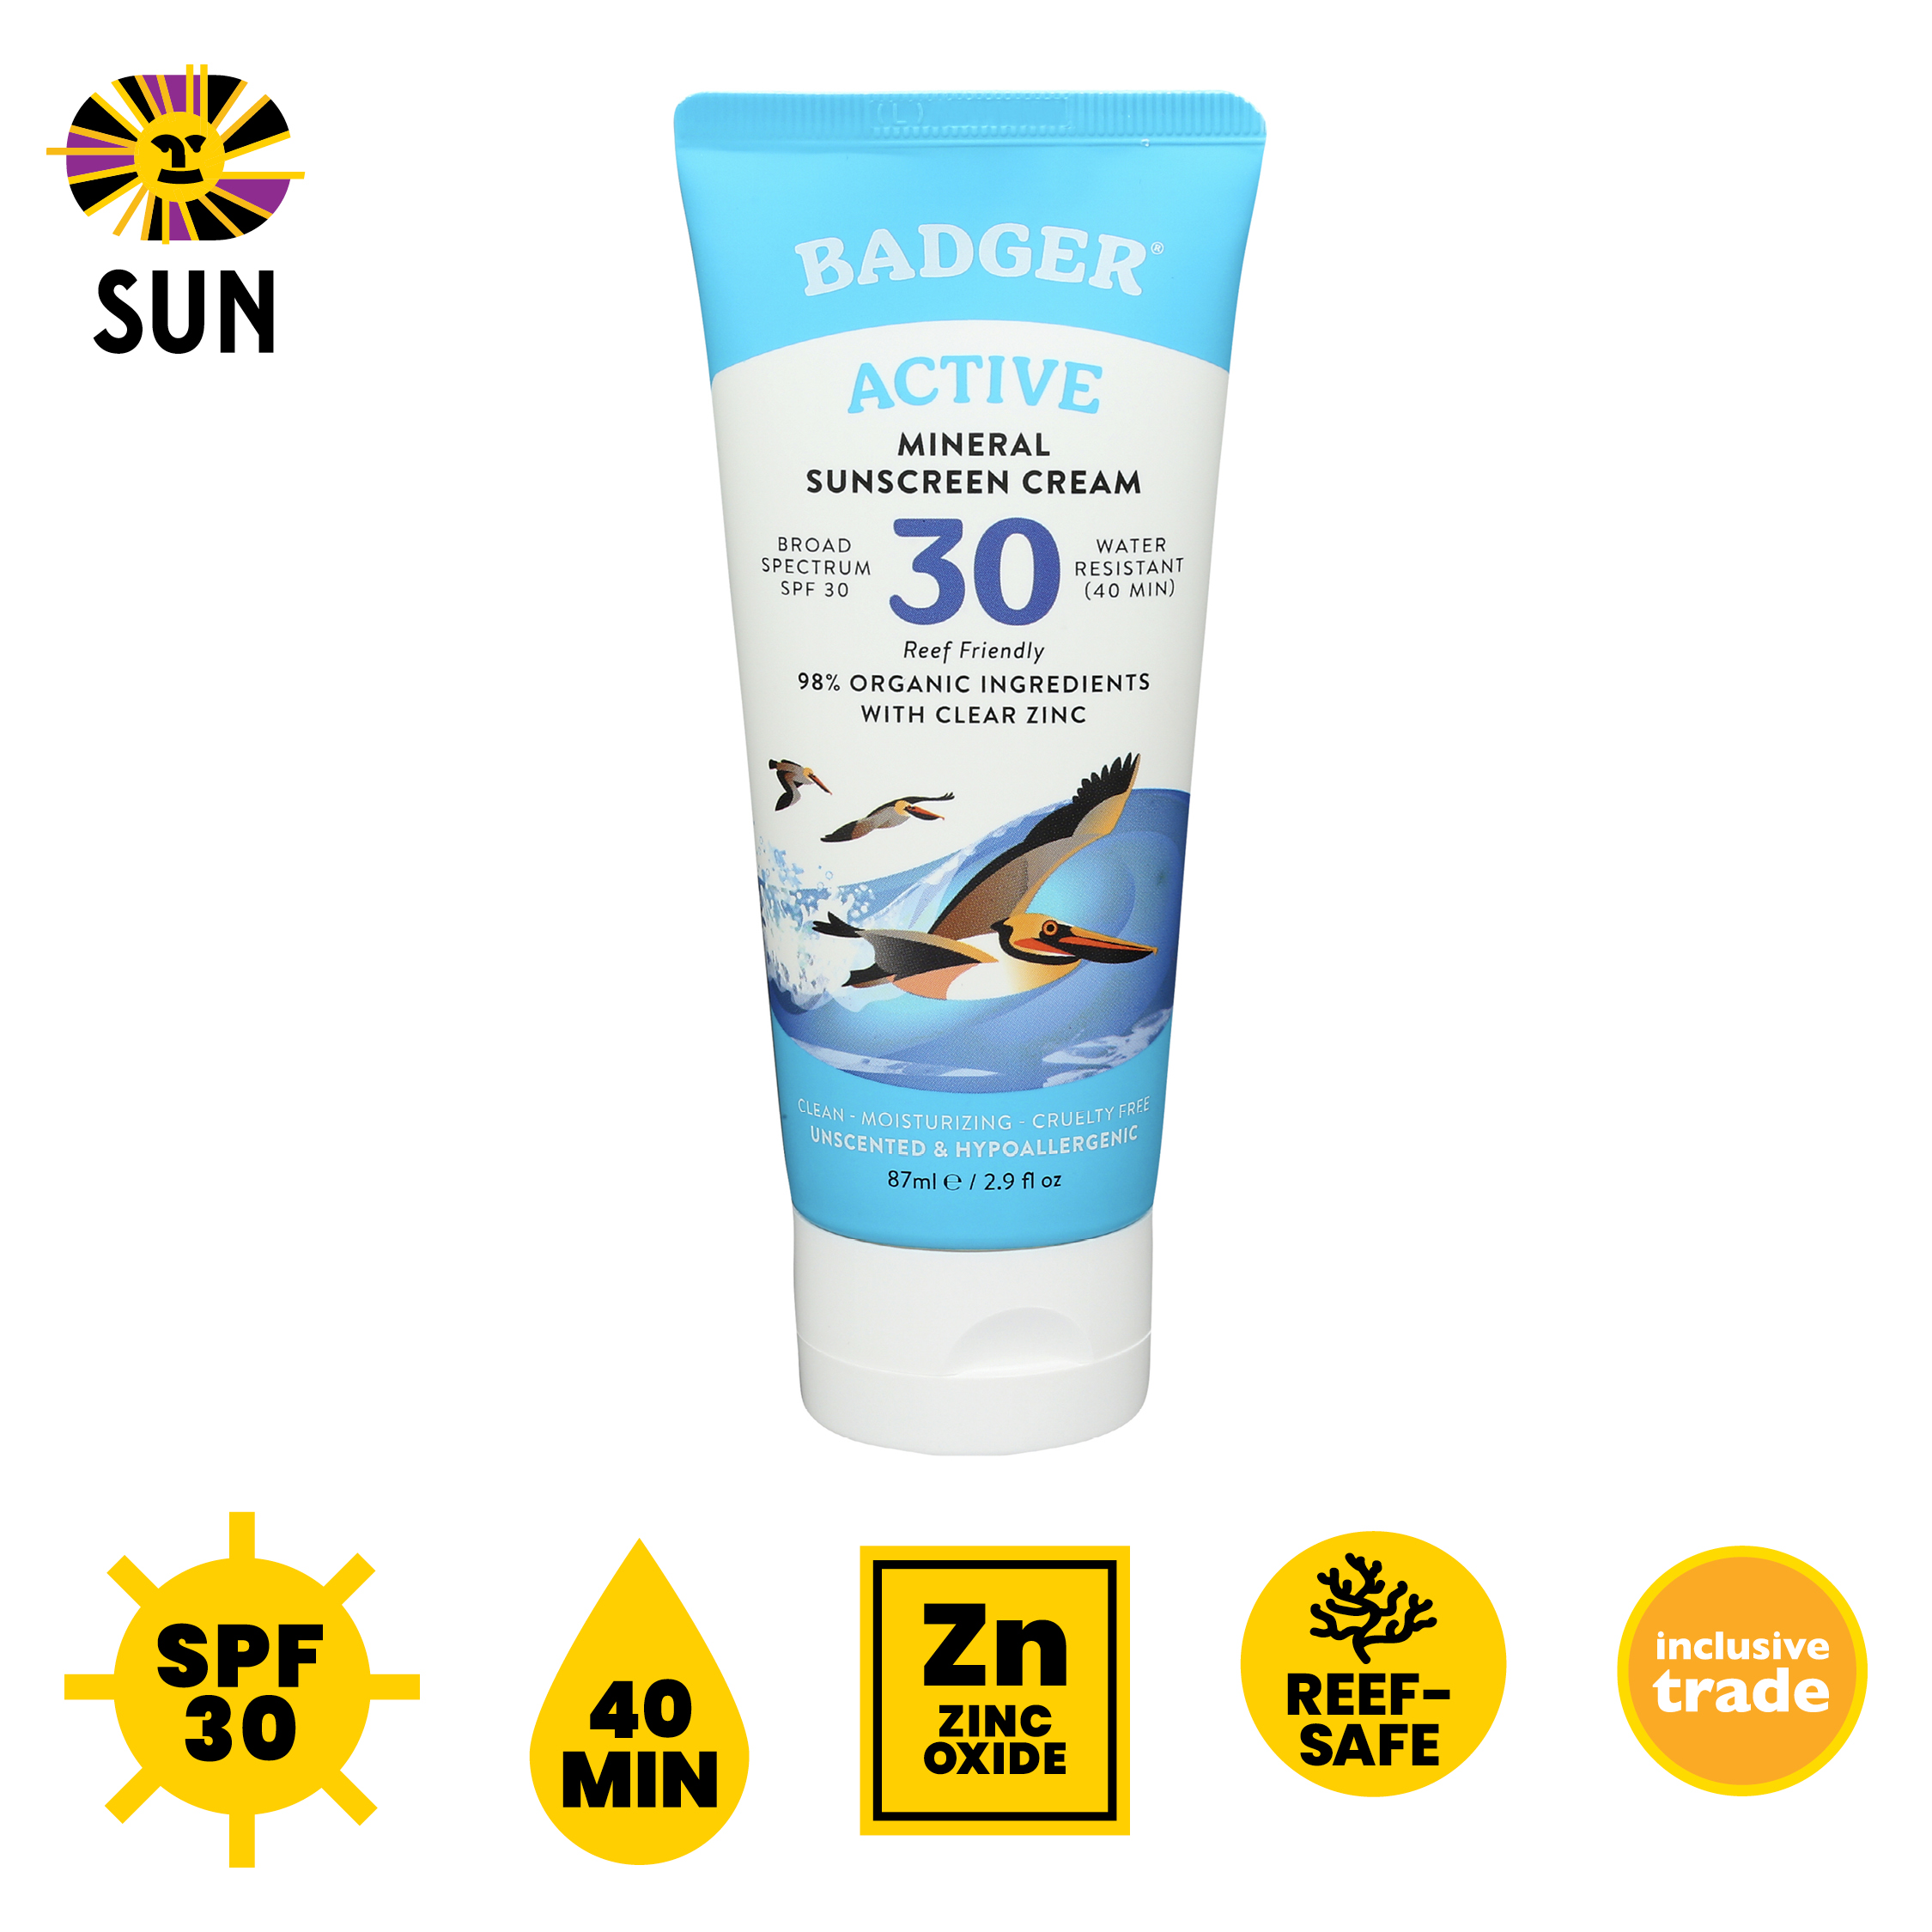 Badger SPF 30 Active Mineral Sunscreen Unscented